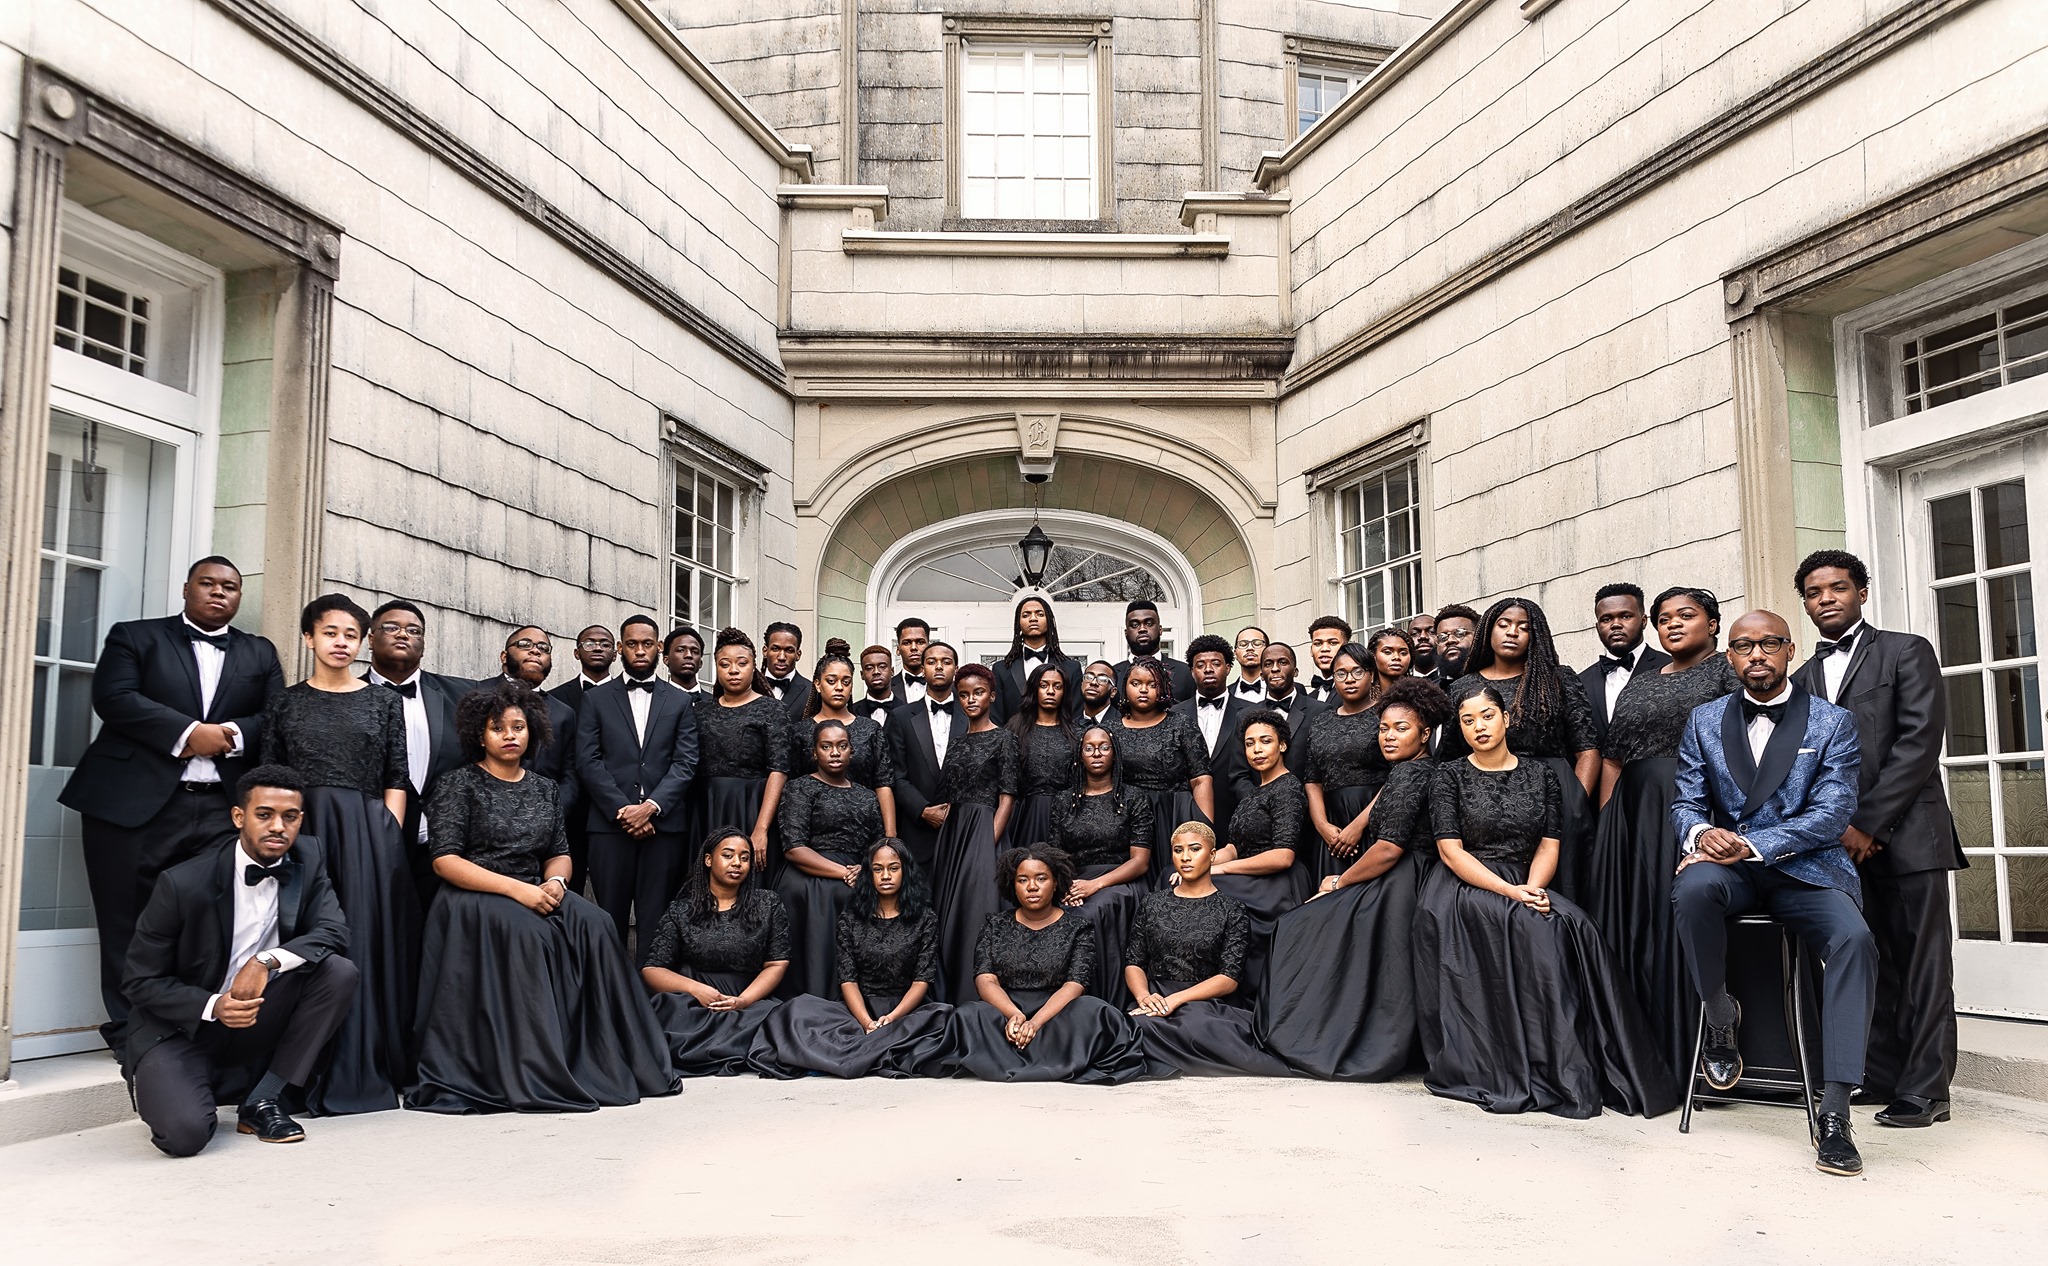 Aeolians at FPC – Tuesday, March 3 at 7 PM | First Presbyterian Church